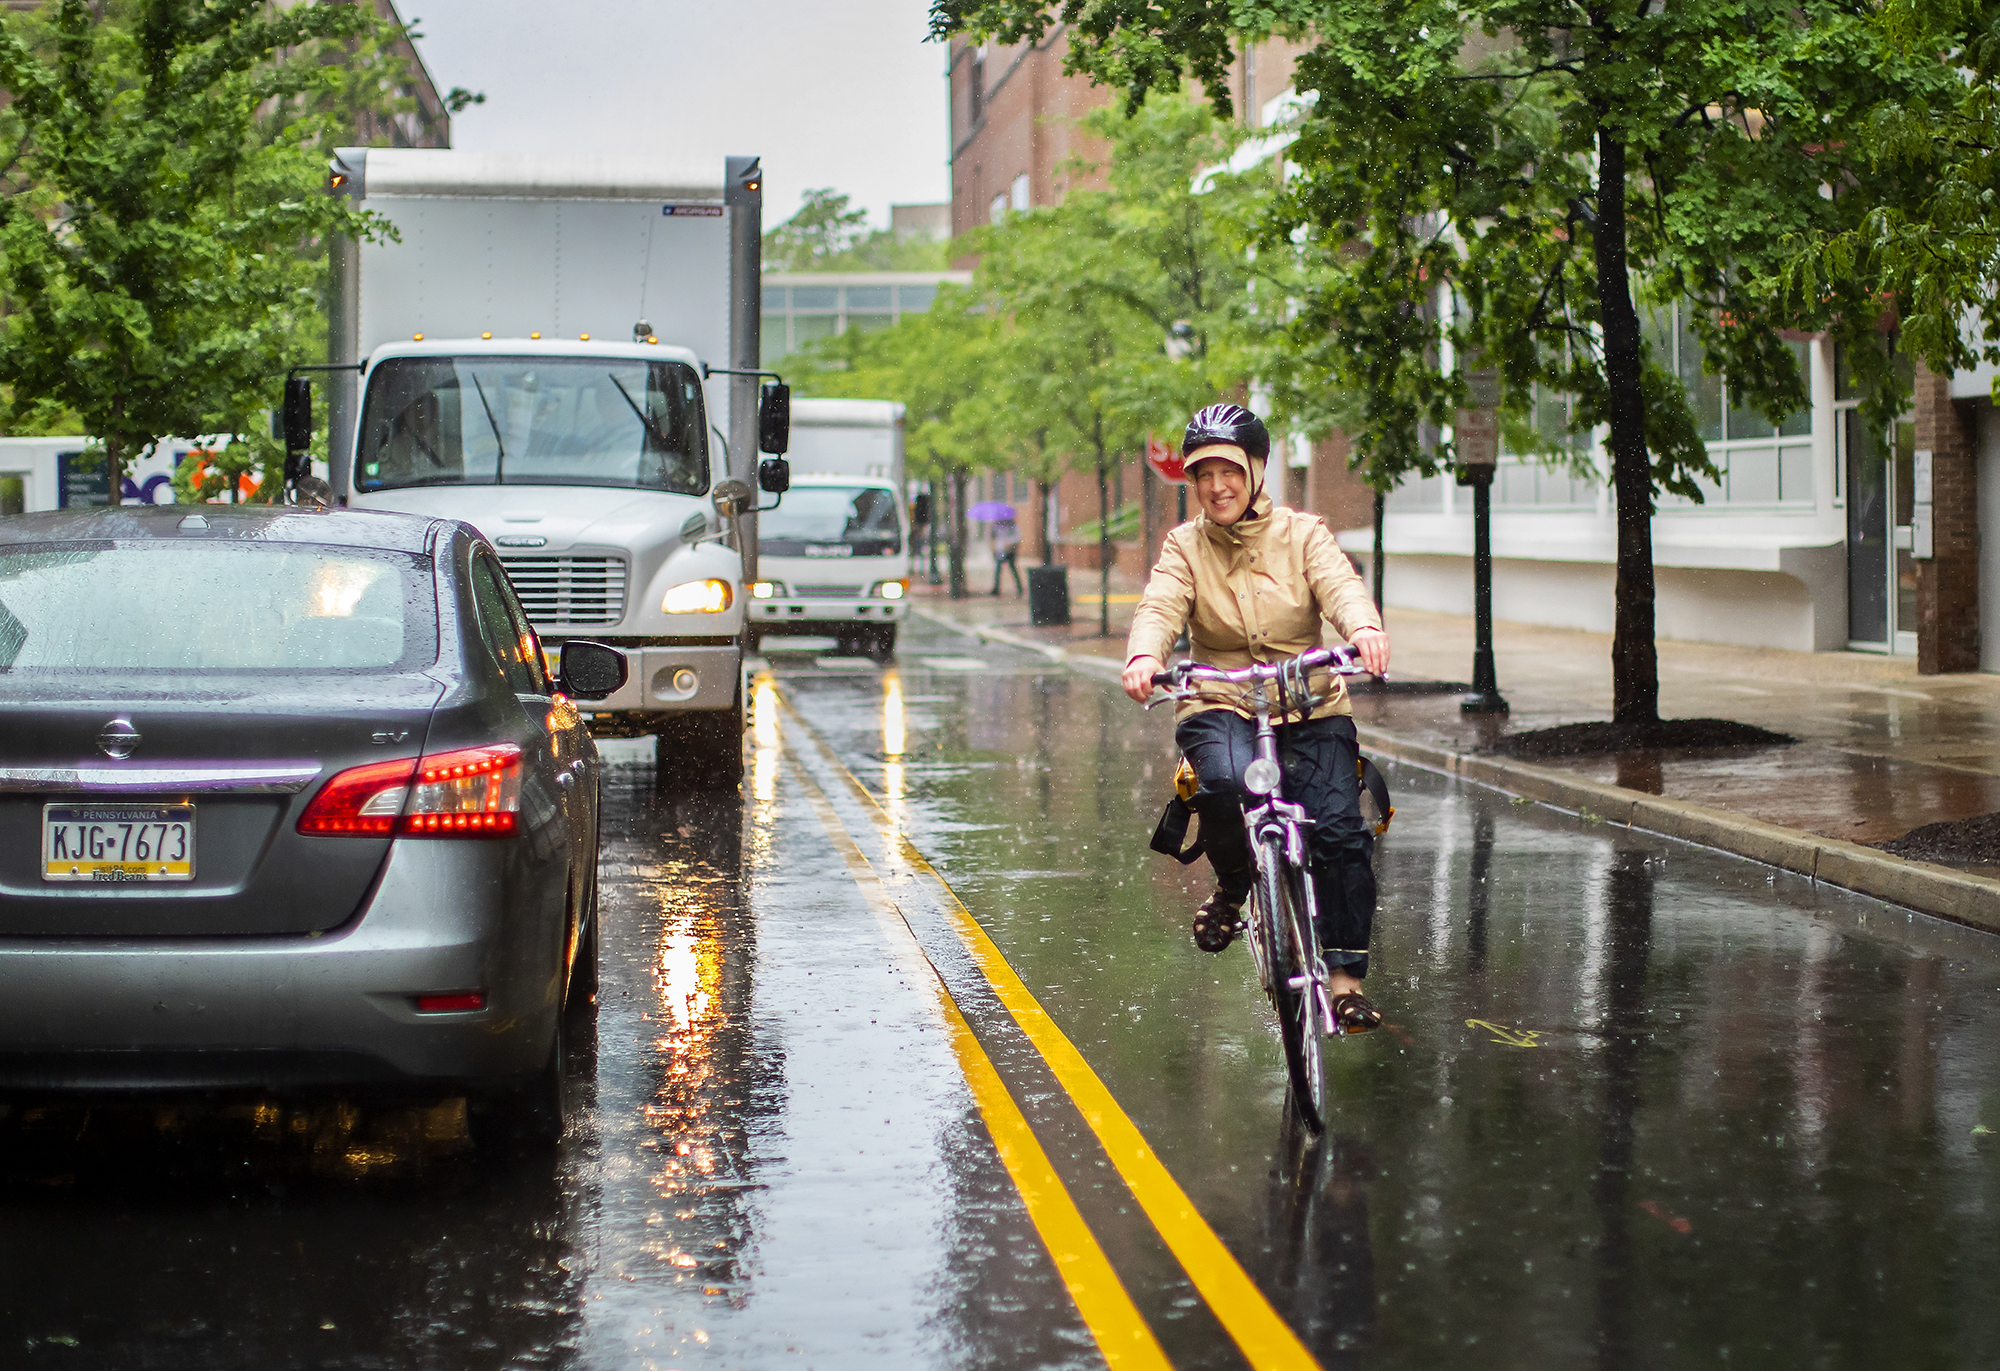 Bike rider in the rain coming down a street with cars and trucks in the opposite lane